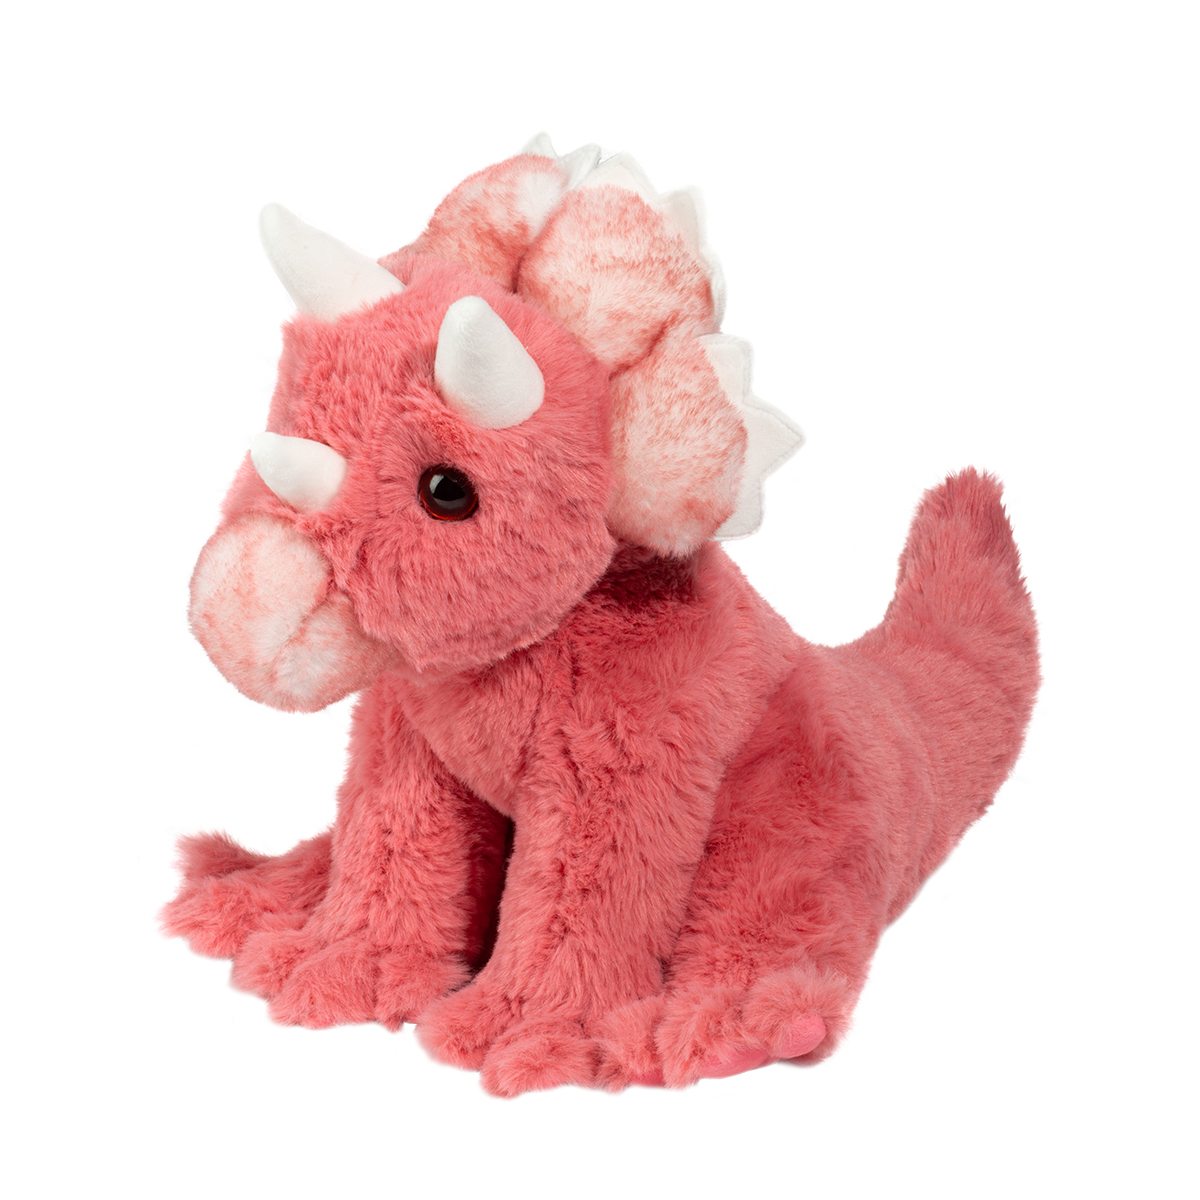 Tracie the Soft Pink Dino